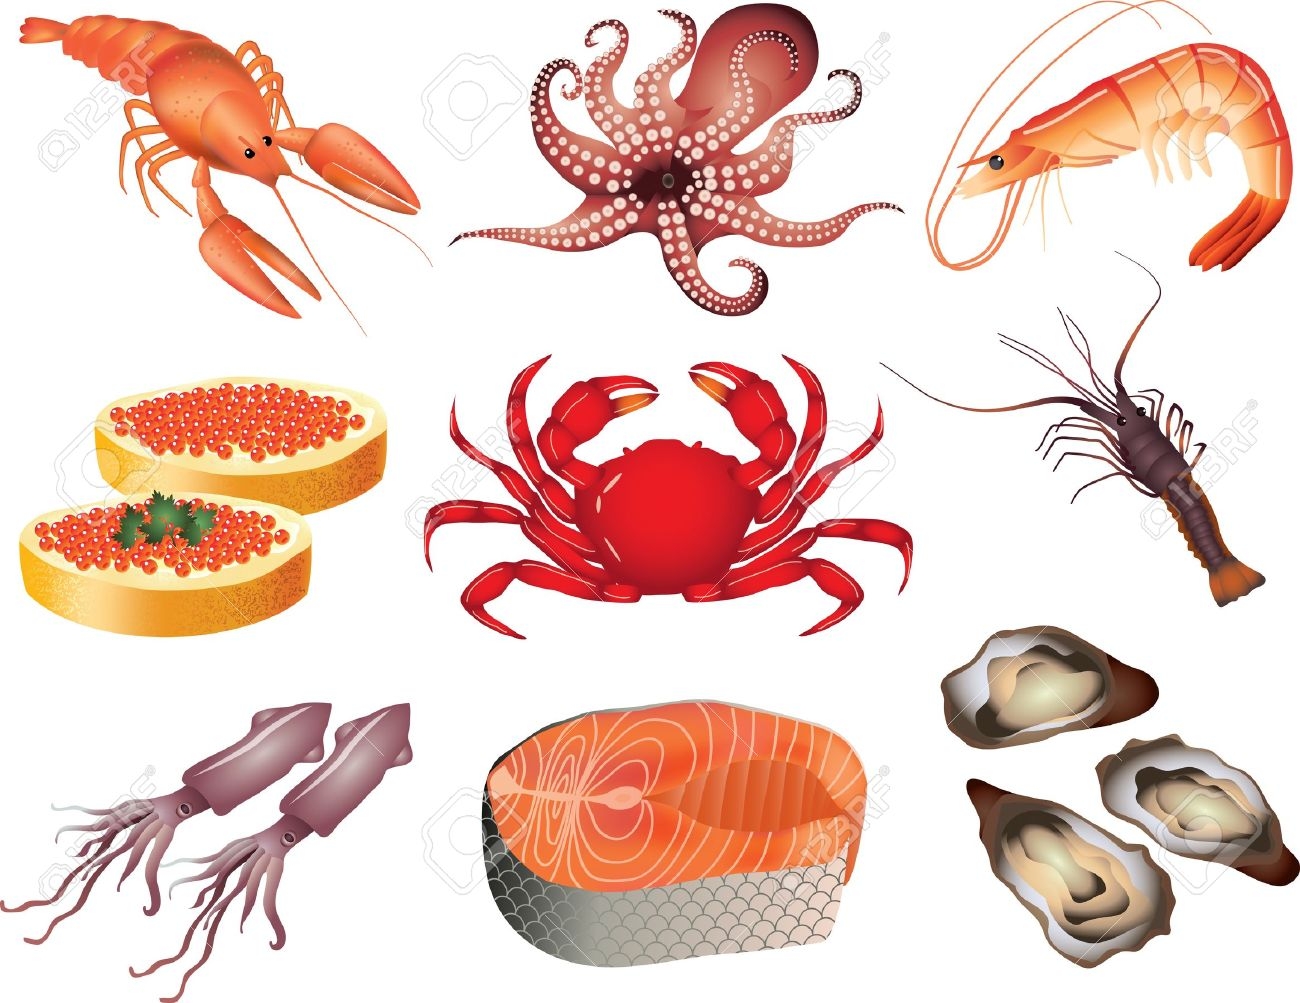 Seafood clipart Elegant Seafood clipart vector Pencil and in.